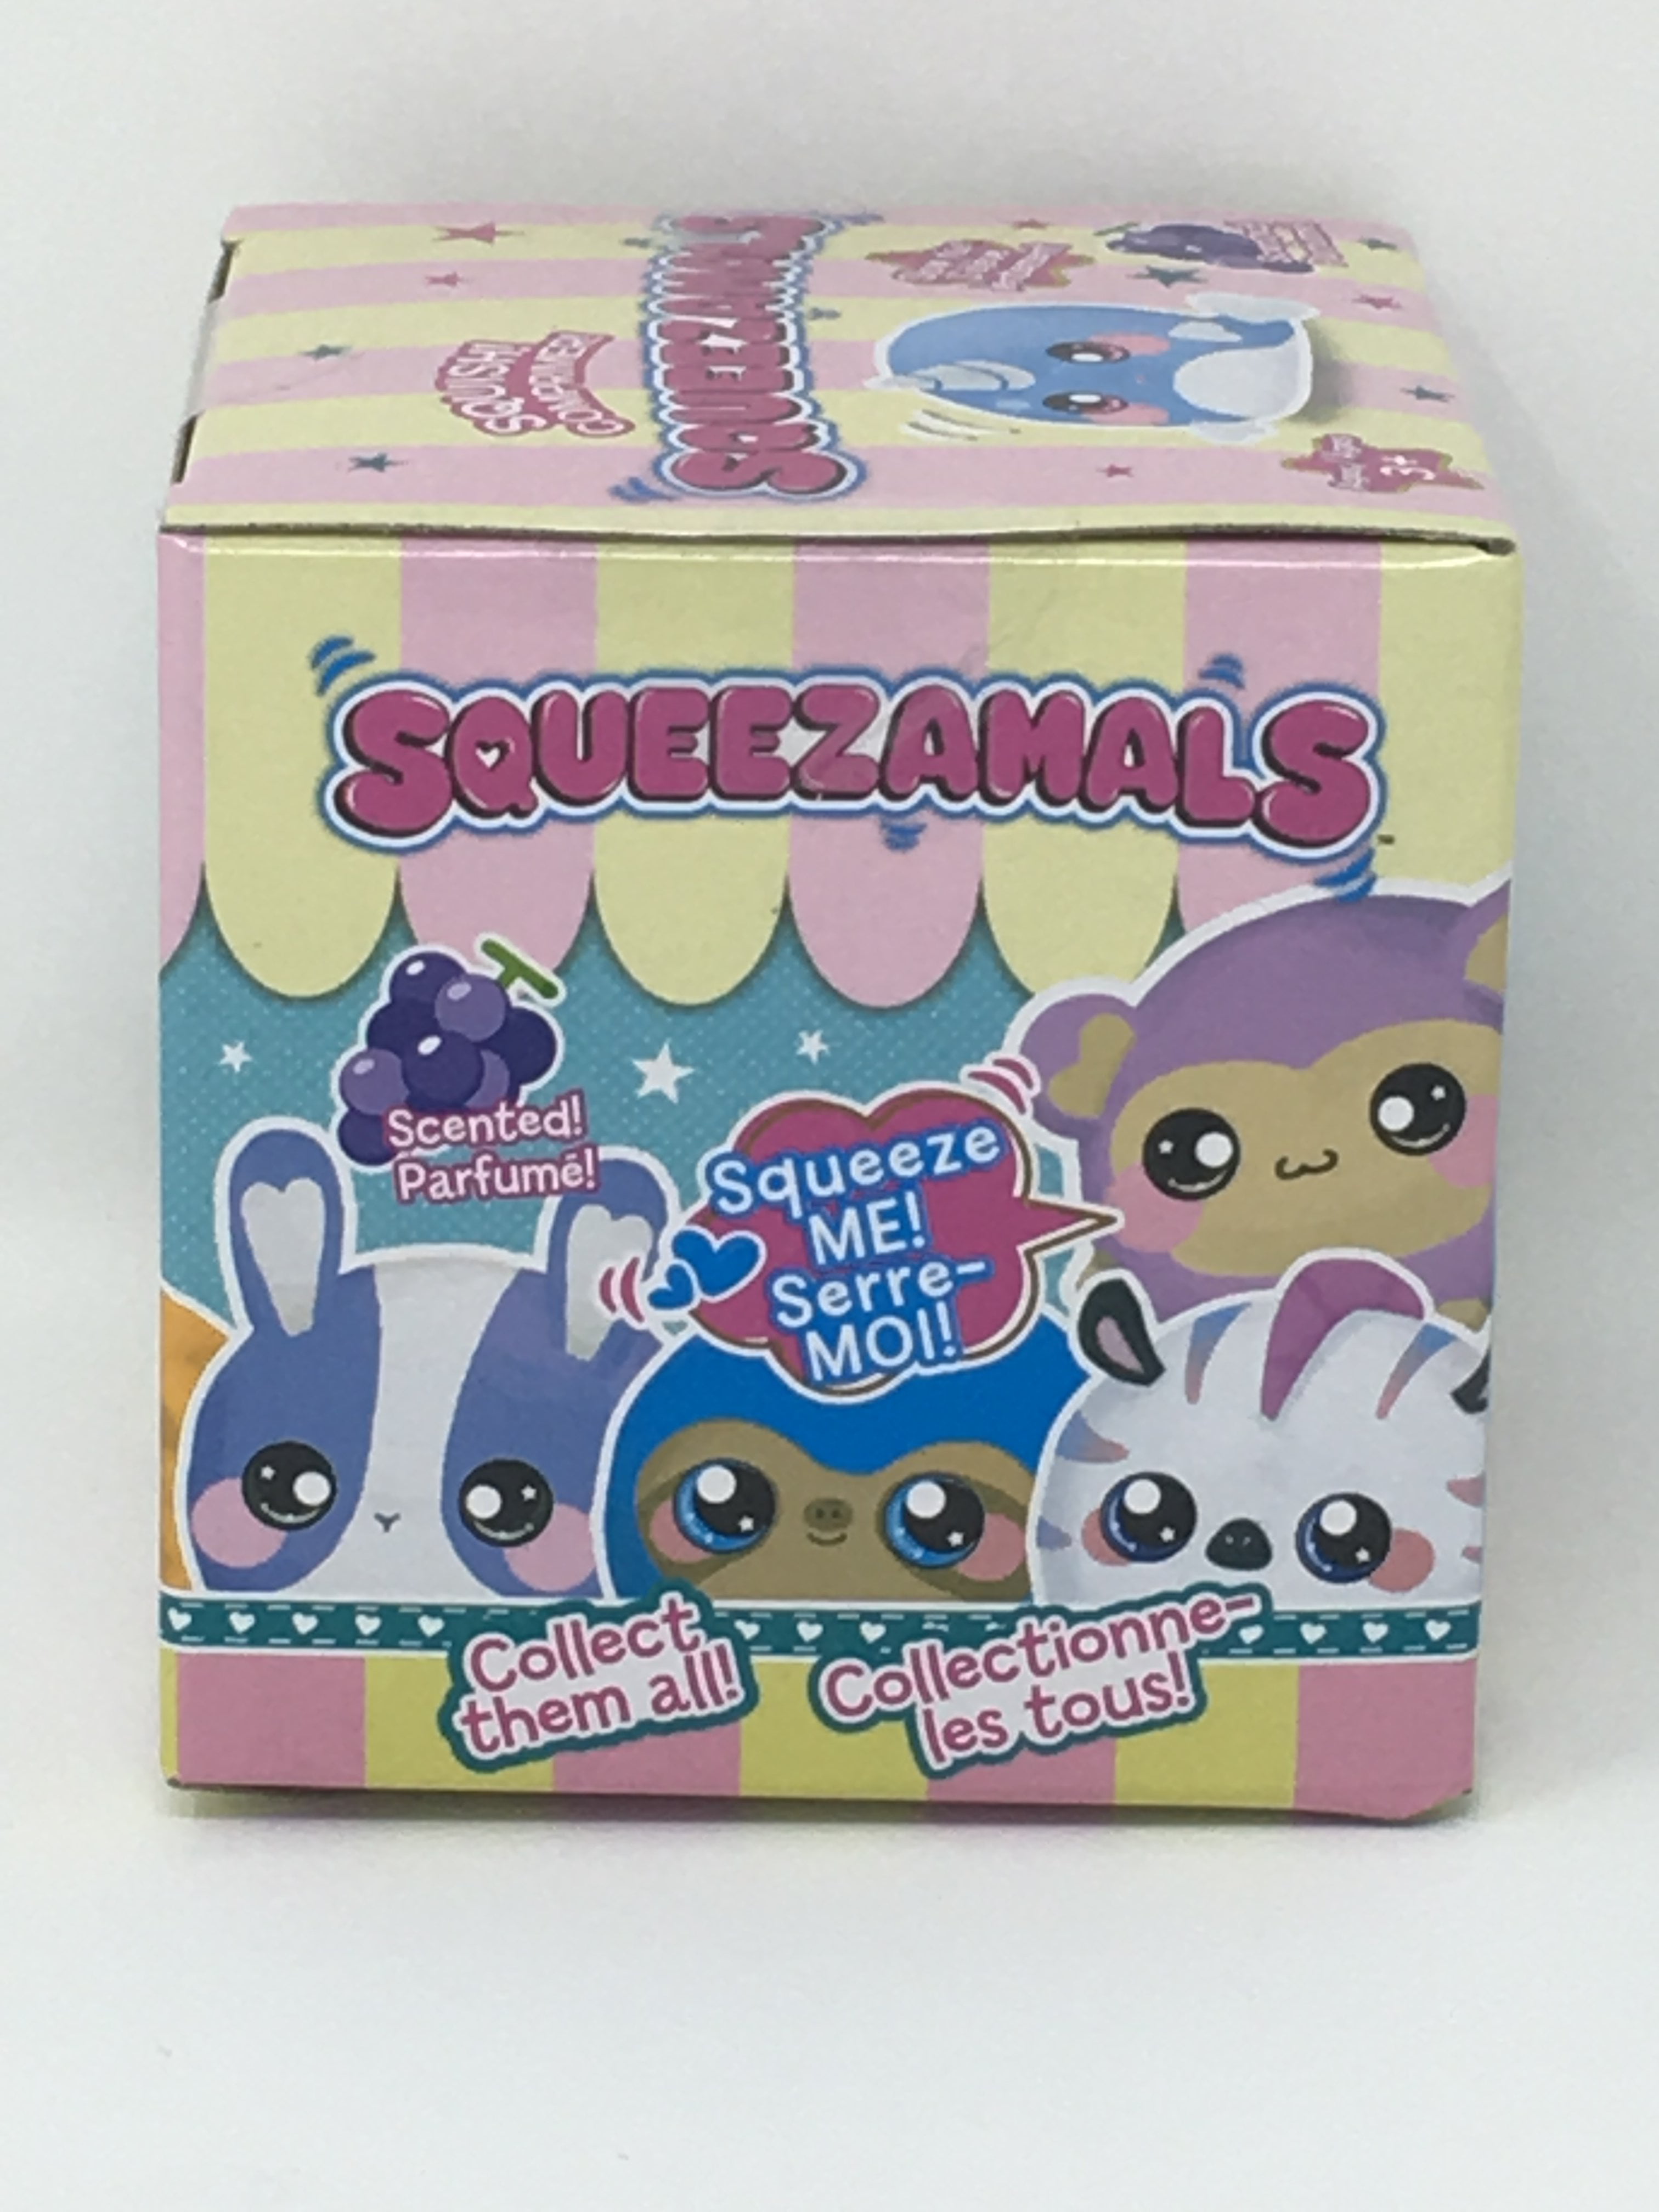 Lot of 5 Squeezamals Series Pets Scented Plush Animals Blind Box Bag 